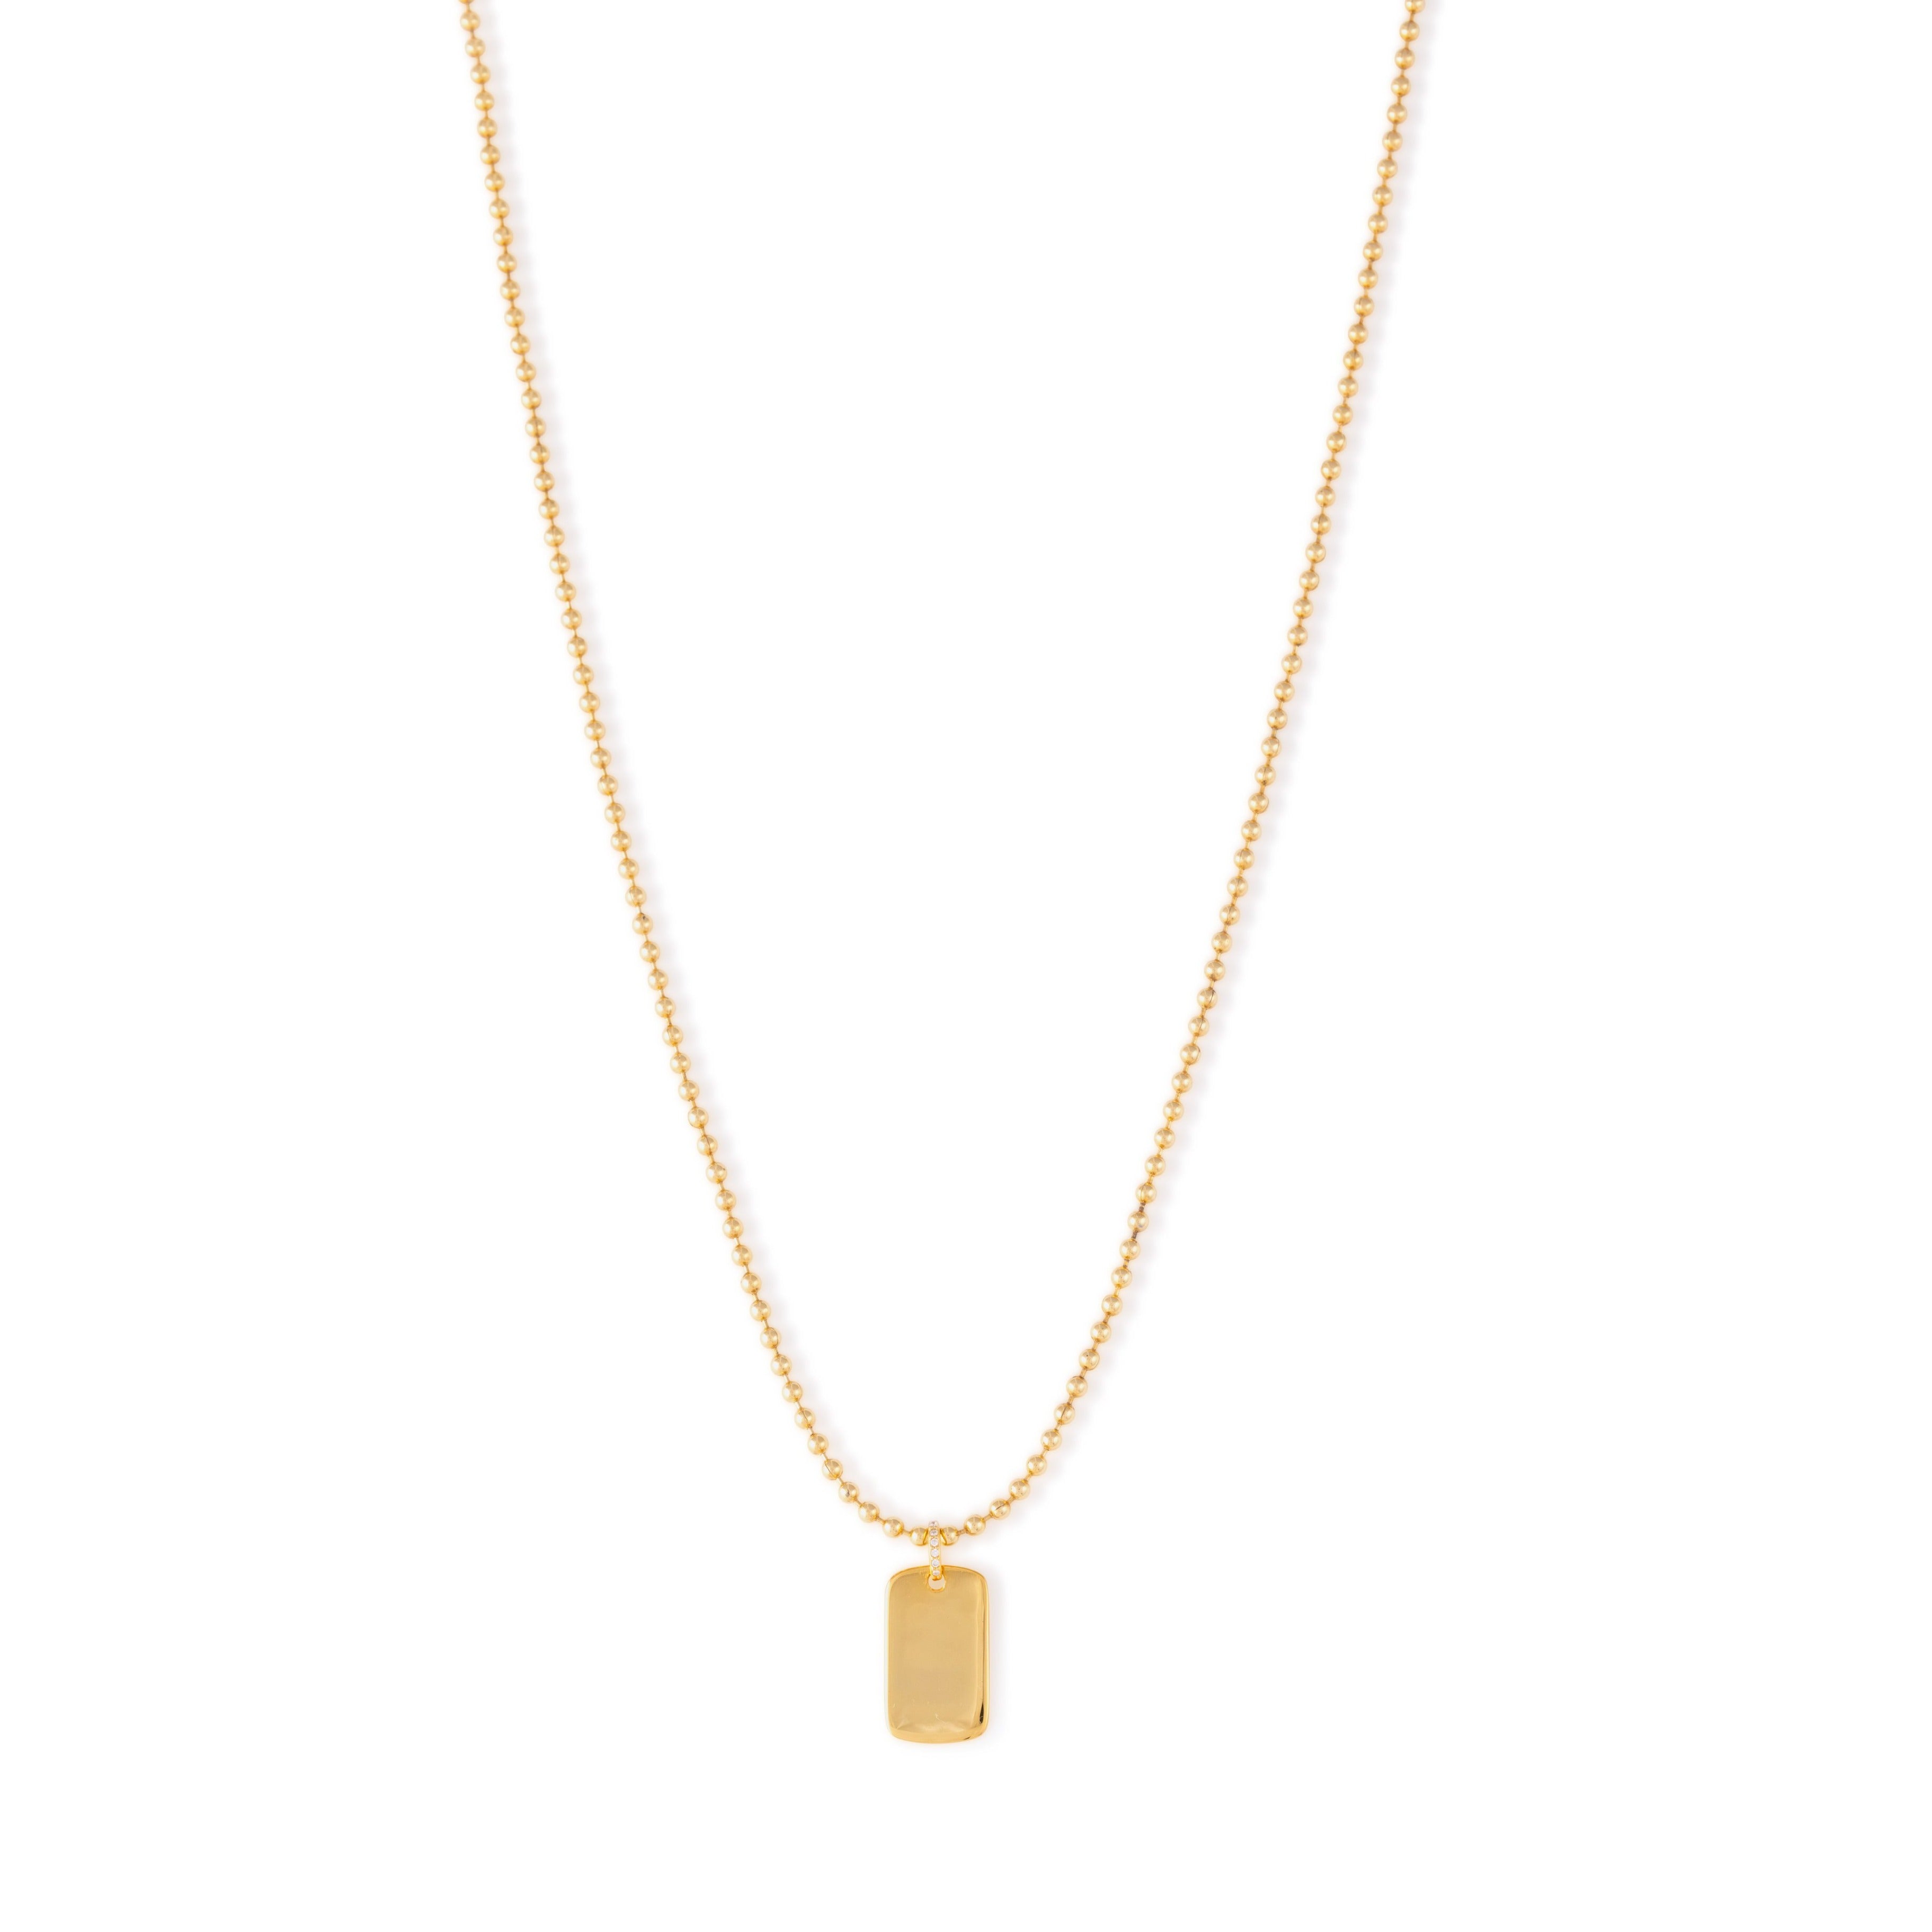 Gold Ball Chain with Dogtag pendant with CZ pav̩ on the bail